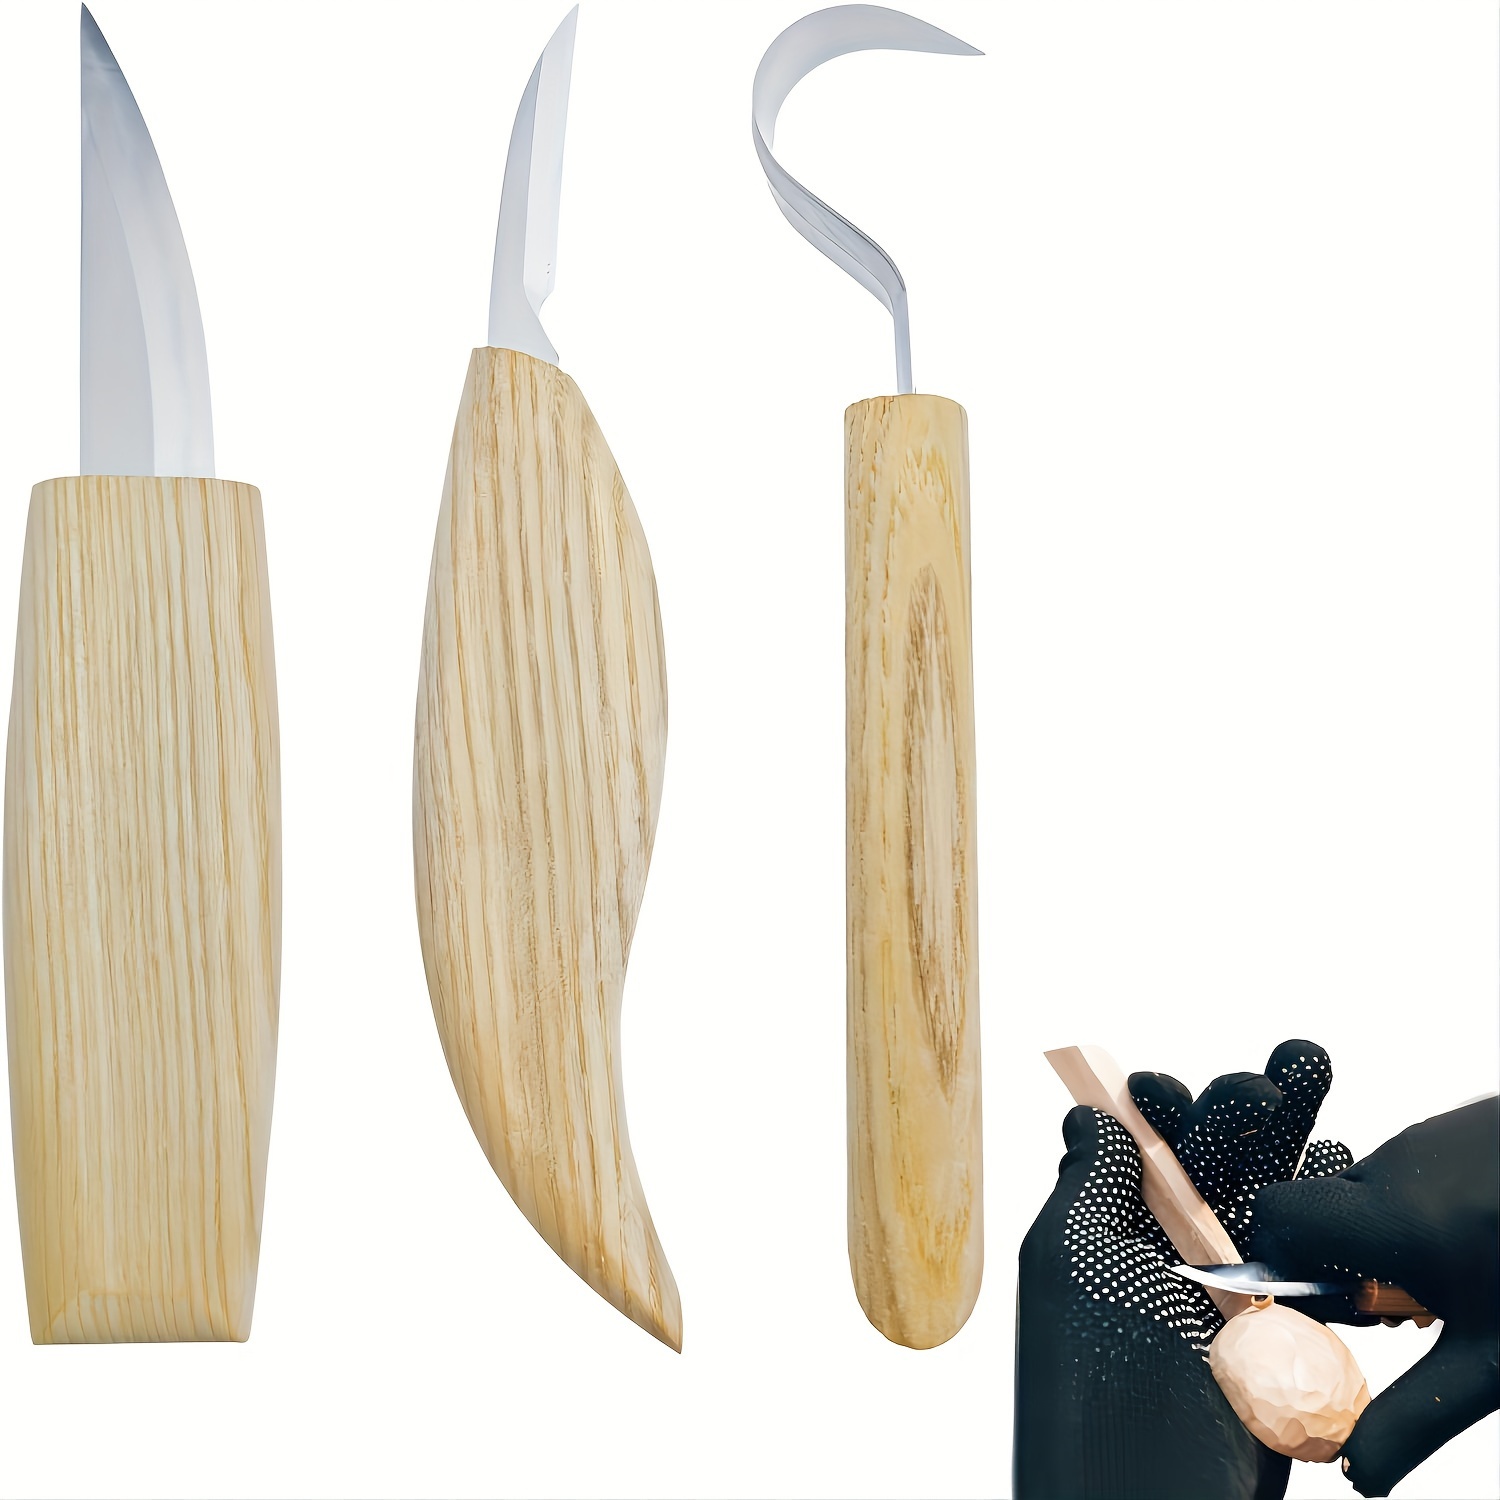 Whittling Wood Carving Kit For Beginners Chip Carving Knife Kit, Wood  Carving Tools For Spoon/Bowl/Cup/Kuksa DIY Craft Woodworking Hobby Kits For  Adul